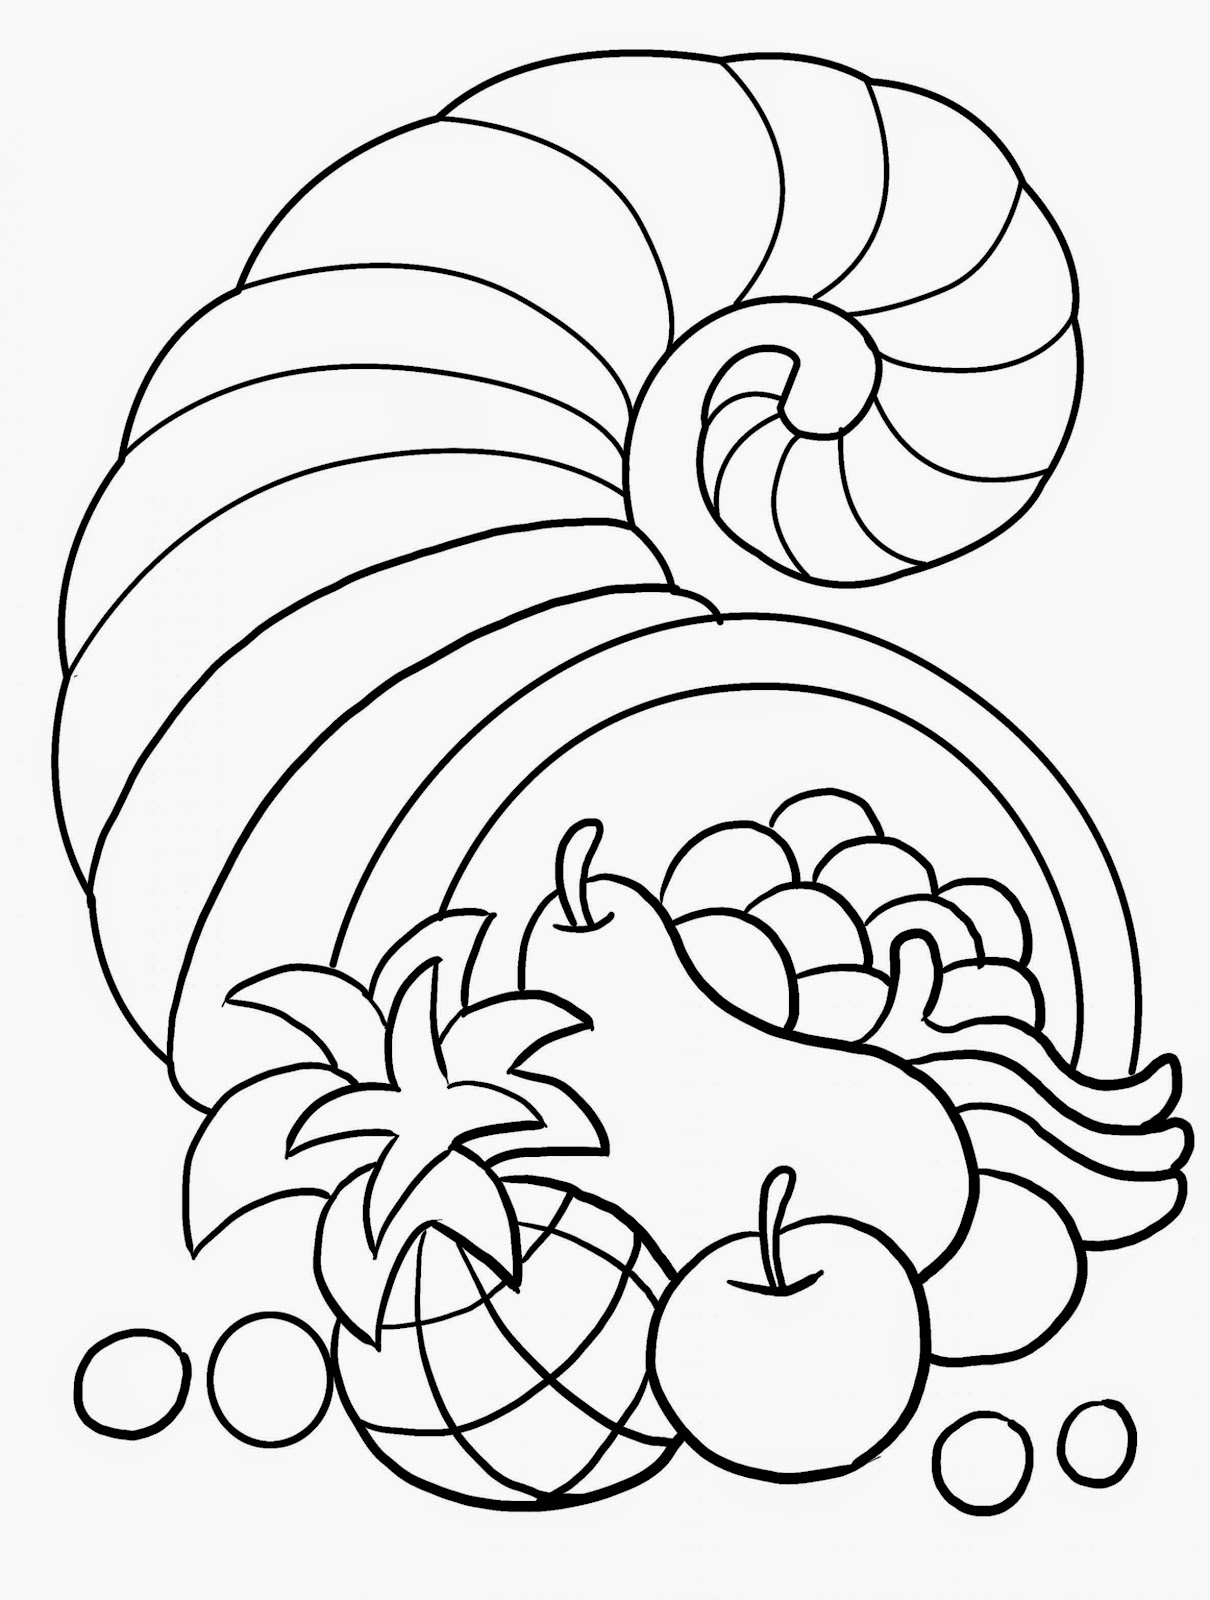 March 2015 | Free Coloring Sheet